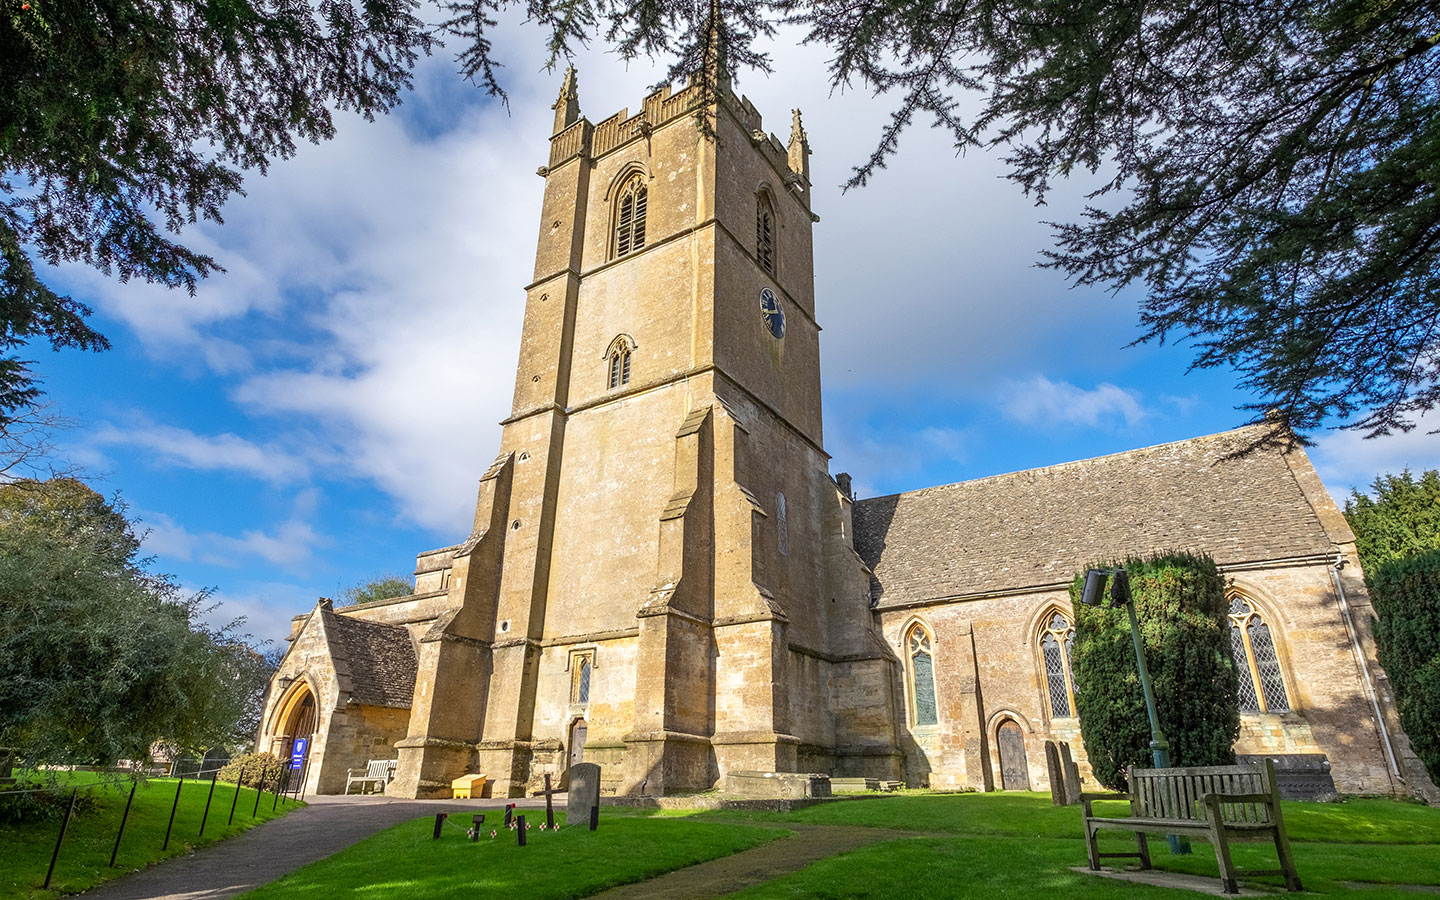 St Edward's Church in Stow-on-the-Wold, Cotswolds